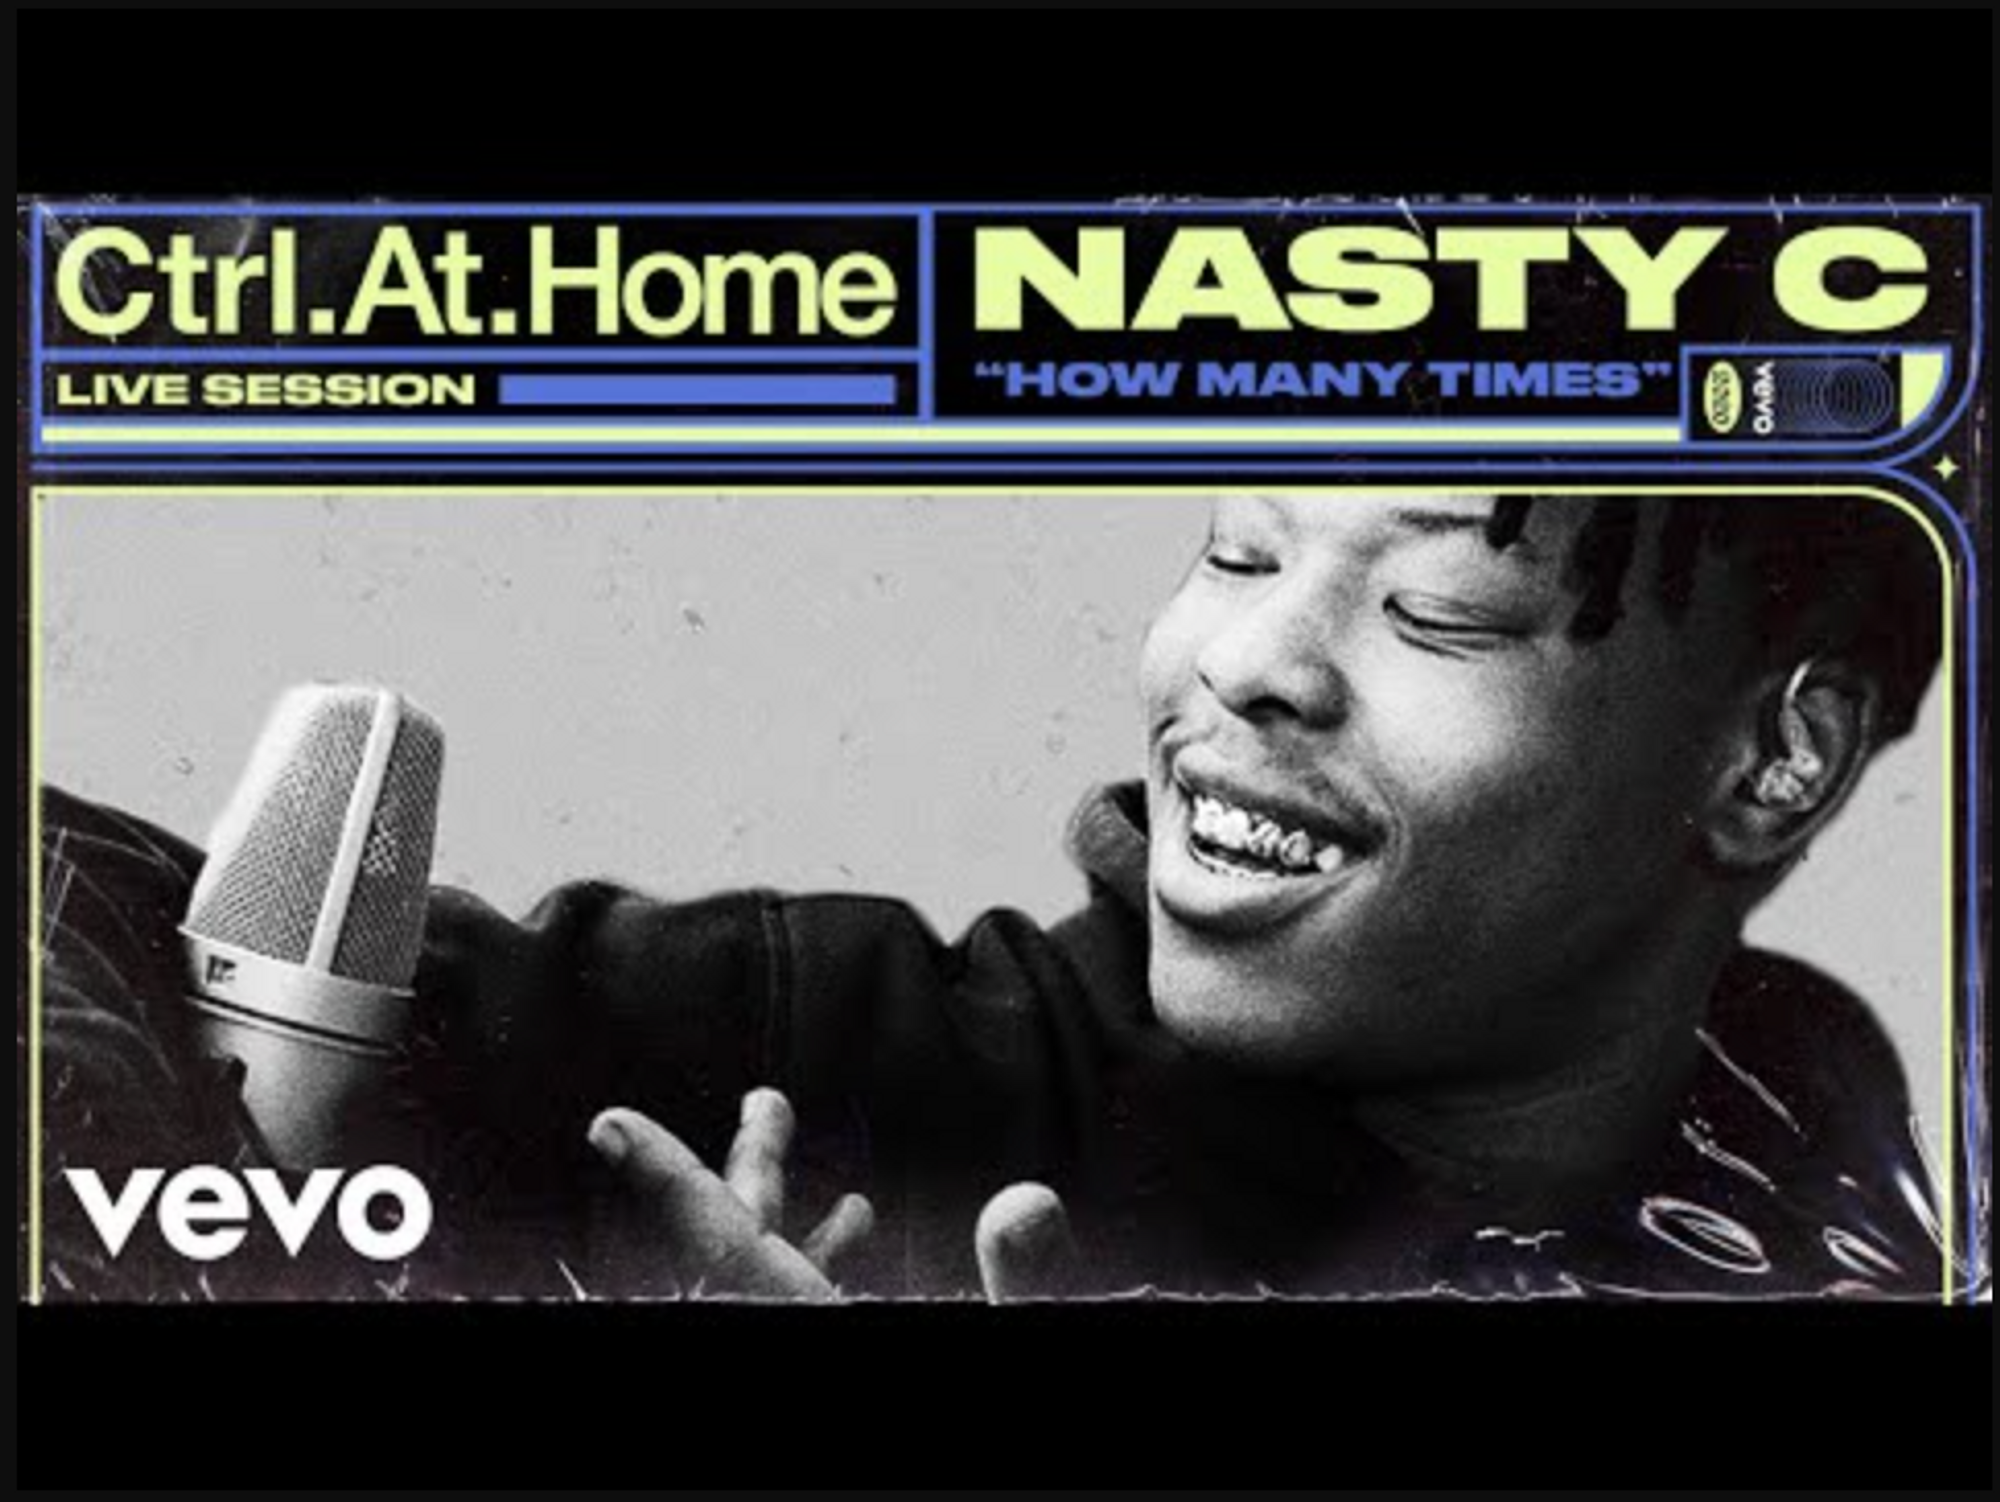 Watch Nasty C Perform ‘Palm Trees’ and ‘How Many Times’ on Vevo’s ‘Ctrl.At.Home’